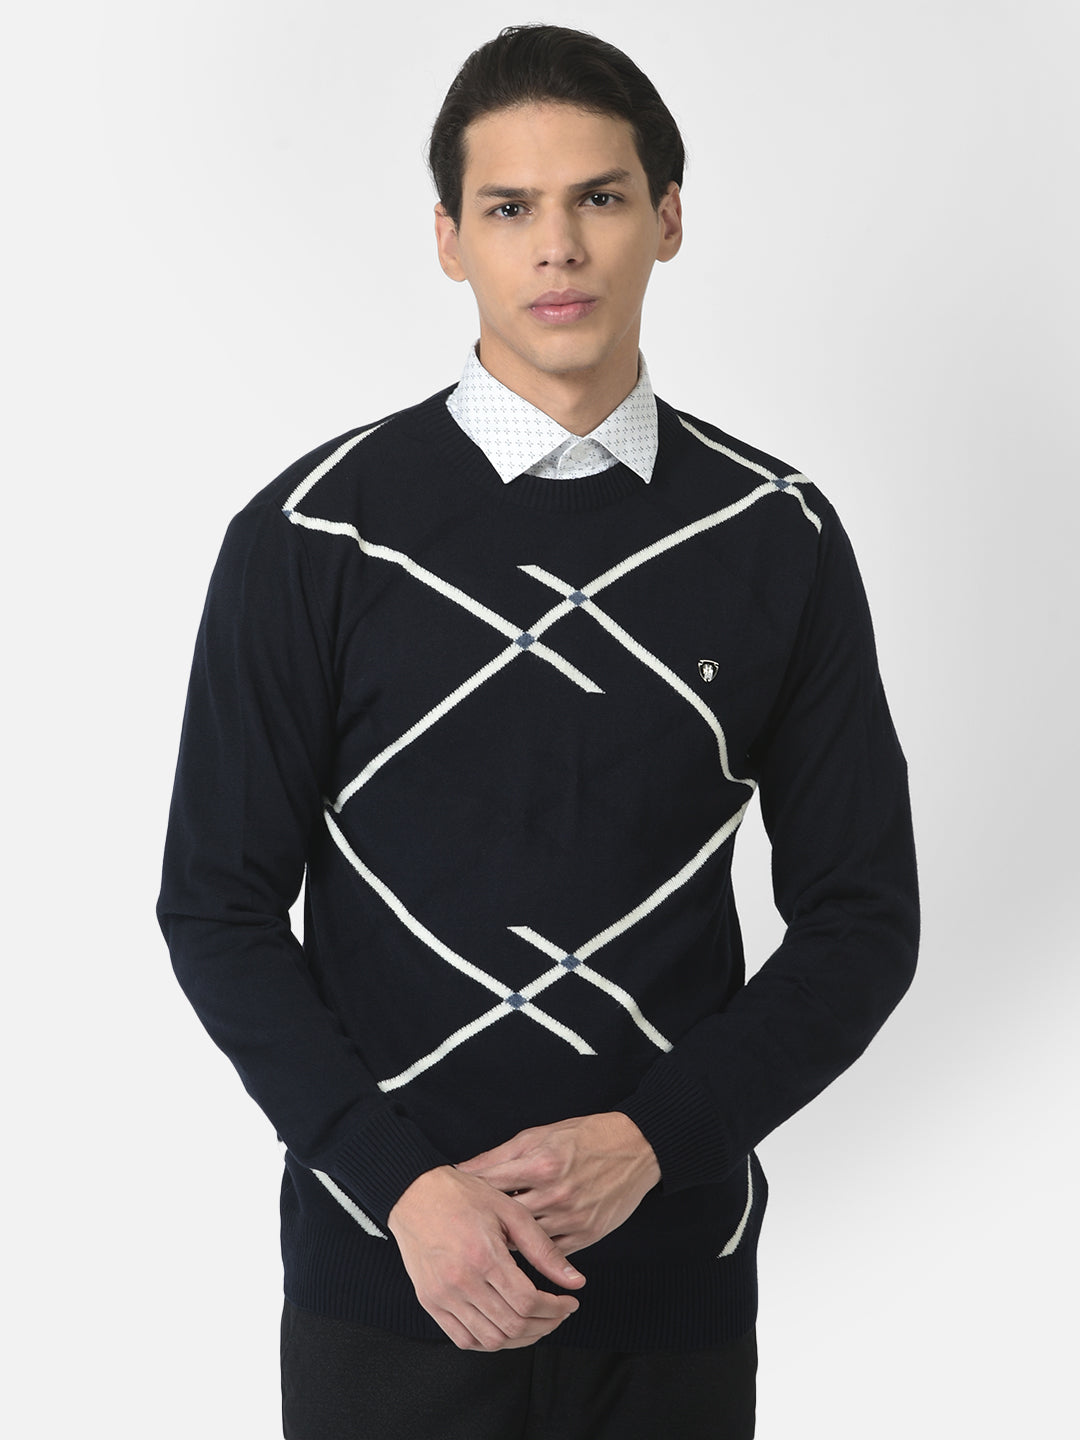 Navy Blue Sweater in Abstract Print 